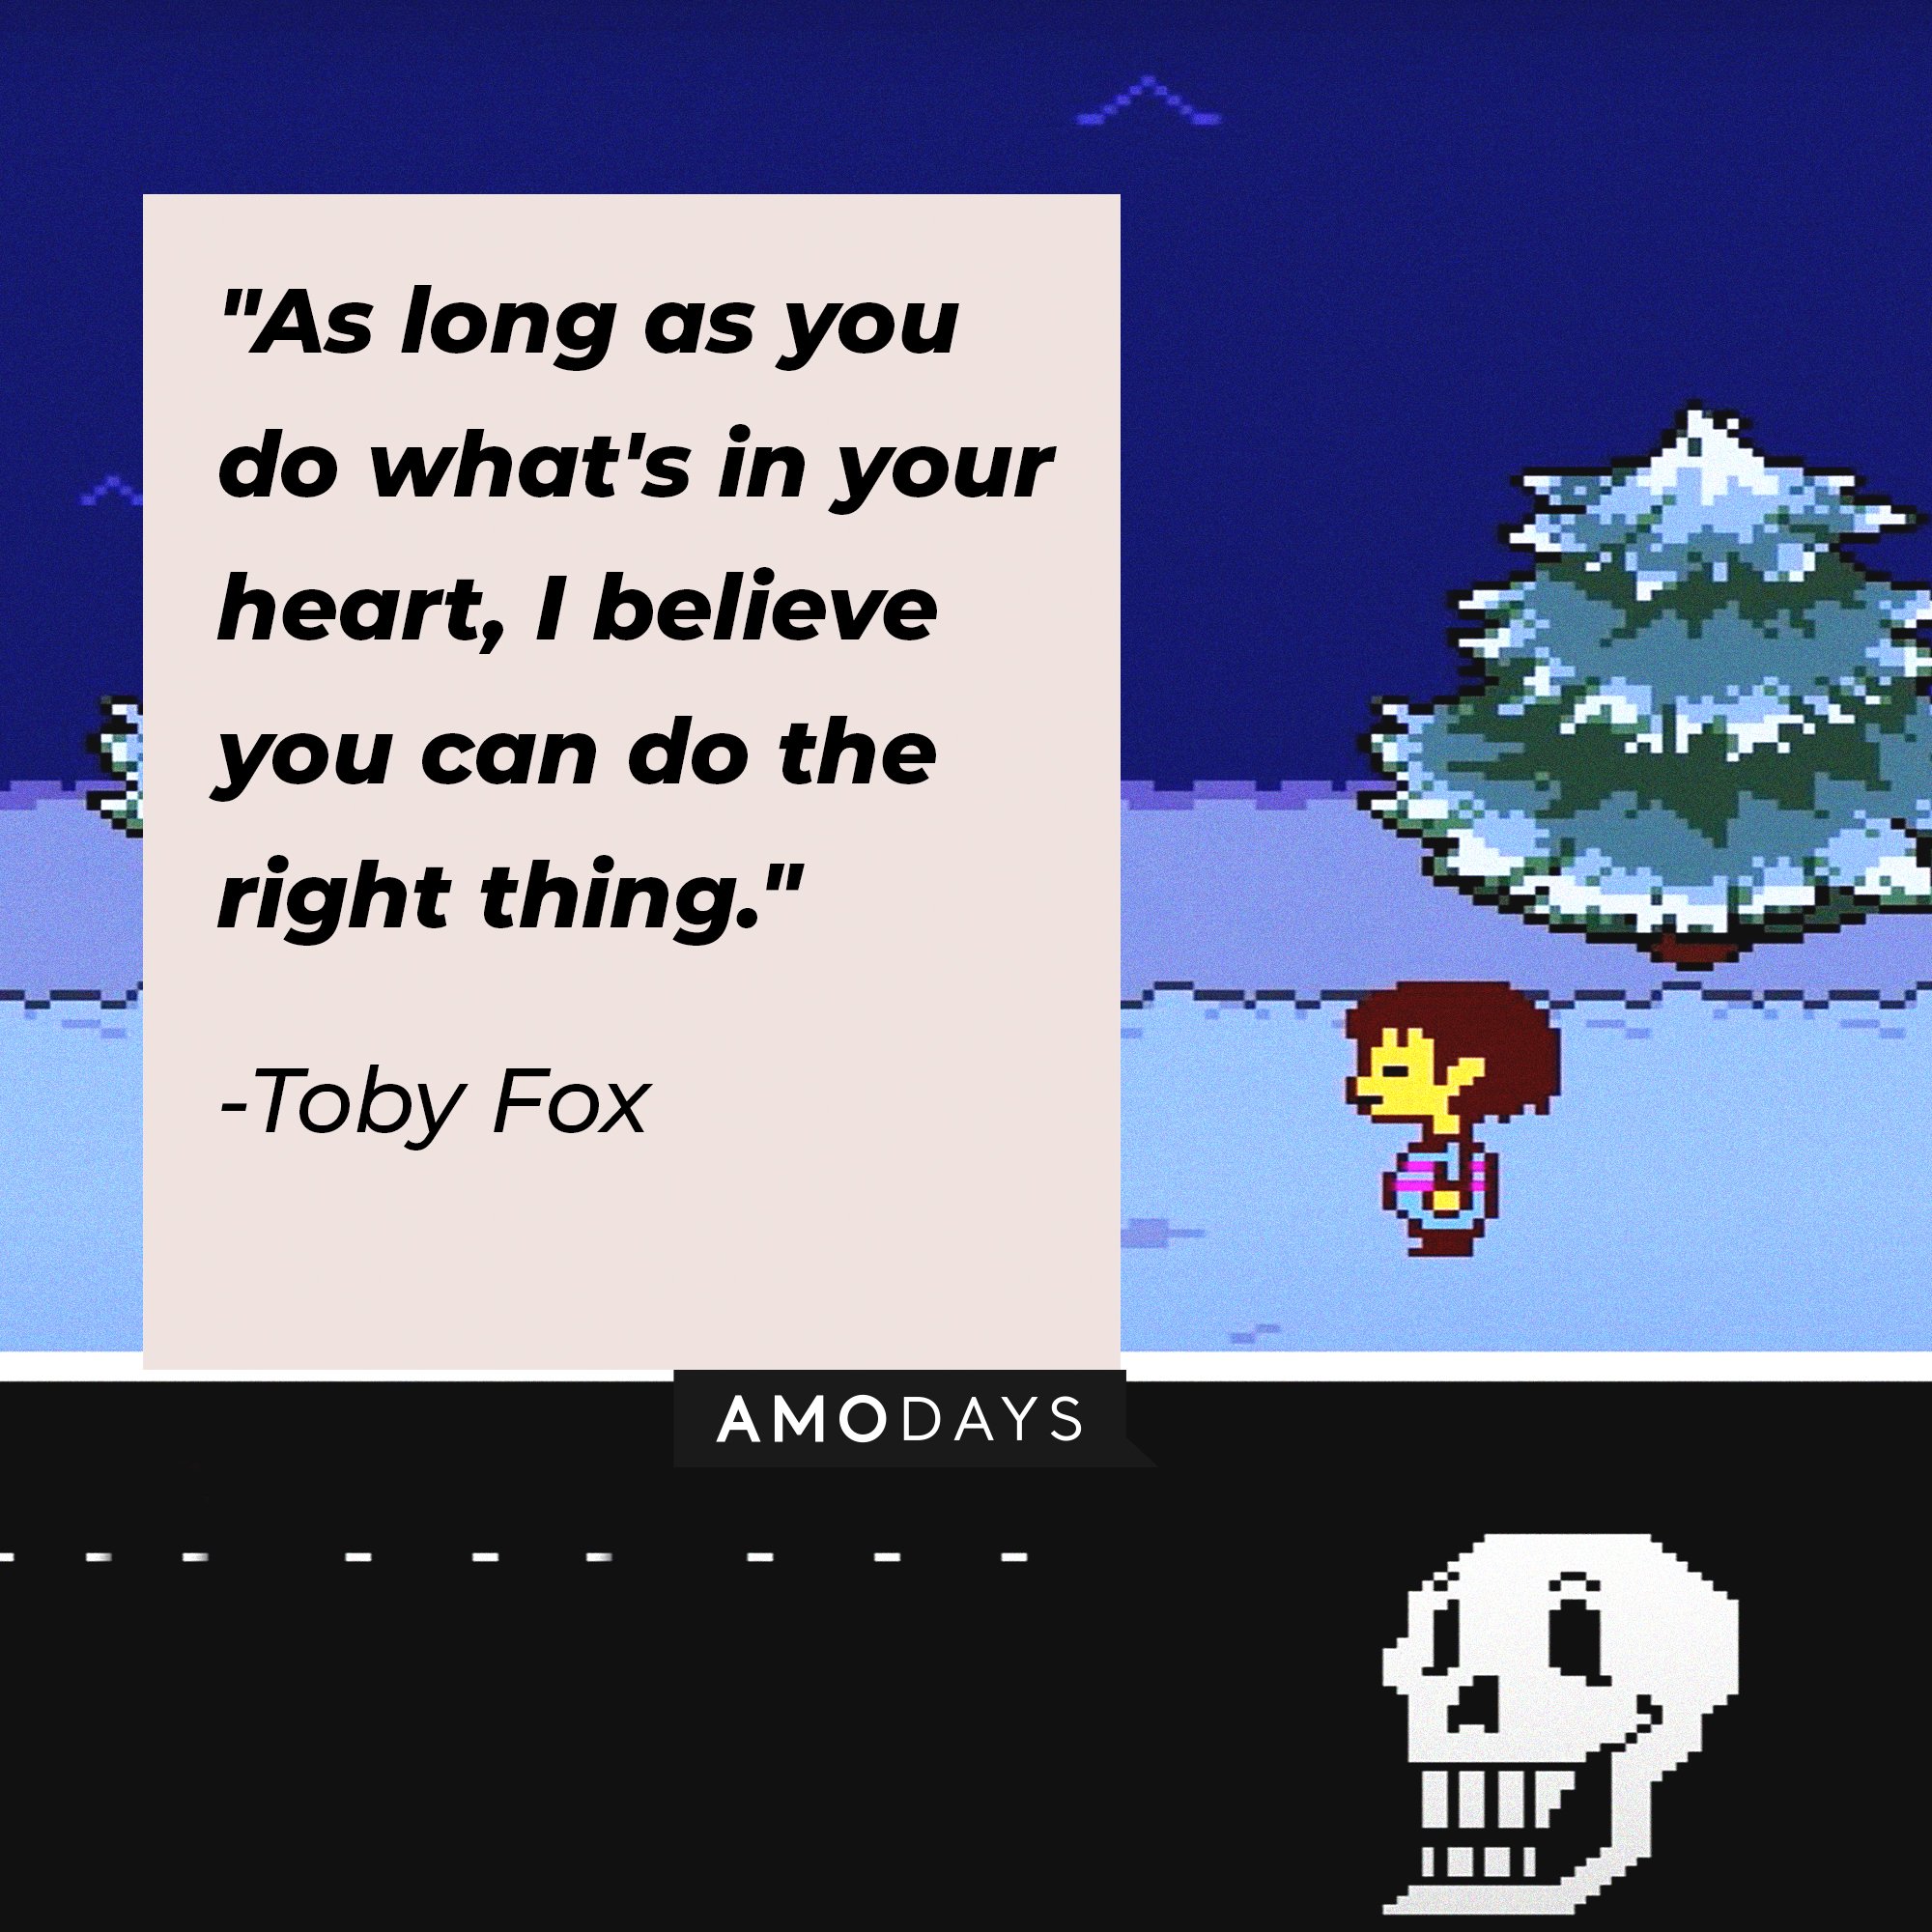  Toby Fox‘s quote: "As long as you do what's in your heart, I believe you can do the right thing." | Image: AmoDays